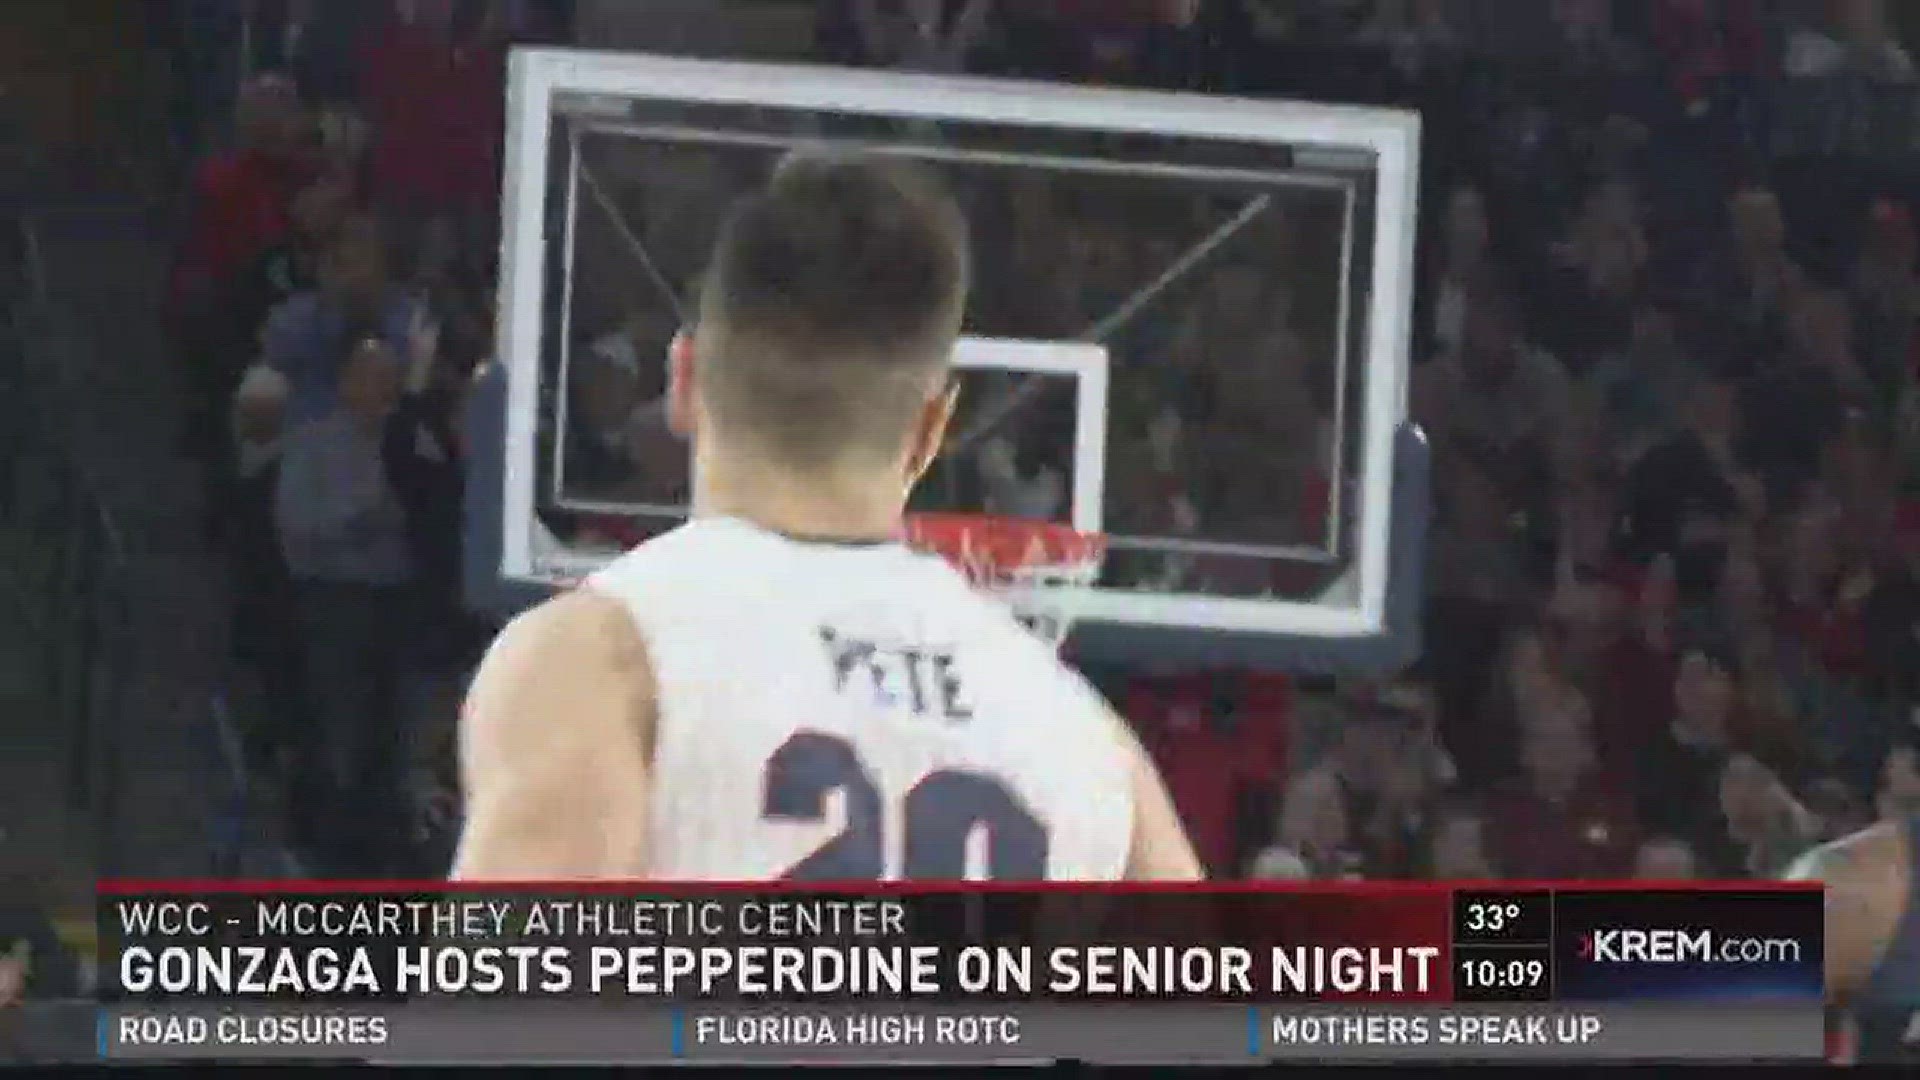 For the first time in three years, Gonzaga got a win on Senior Night this time against Pepperdine. Zags now have a chance to claim the WCC outright with wins next week at San Diego and BYU.